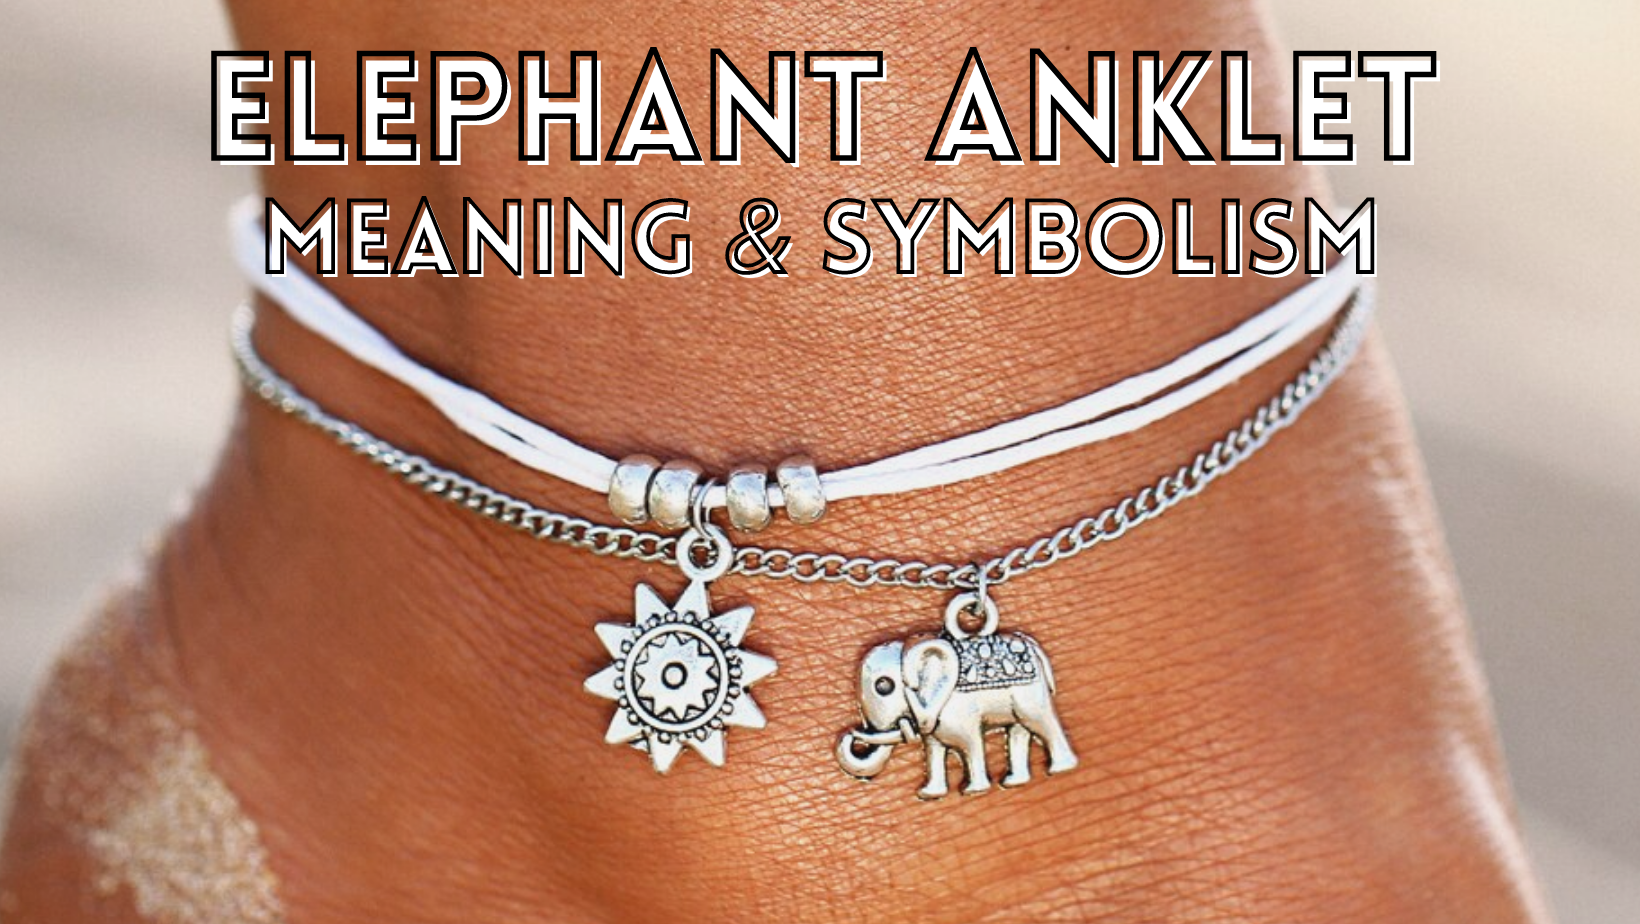 Elephant anklet meaning